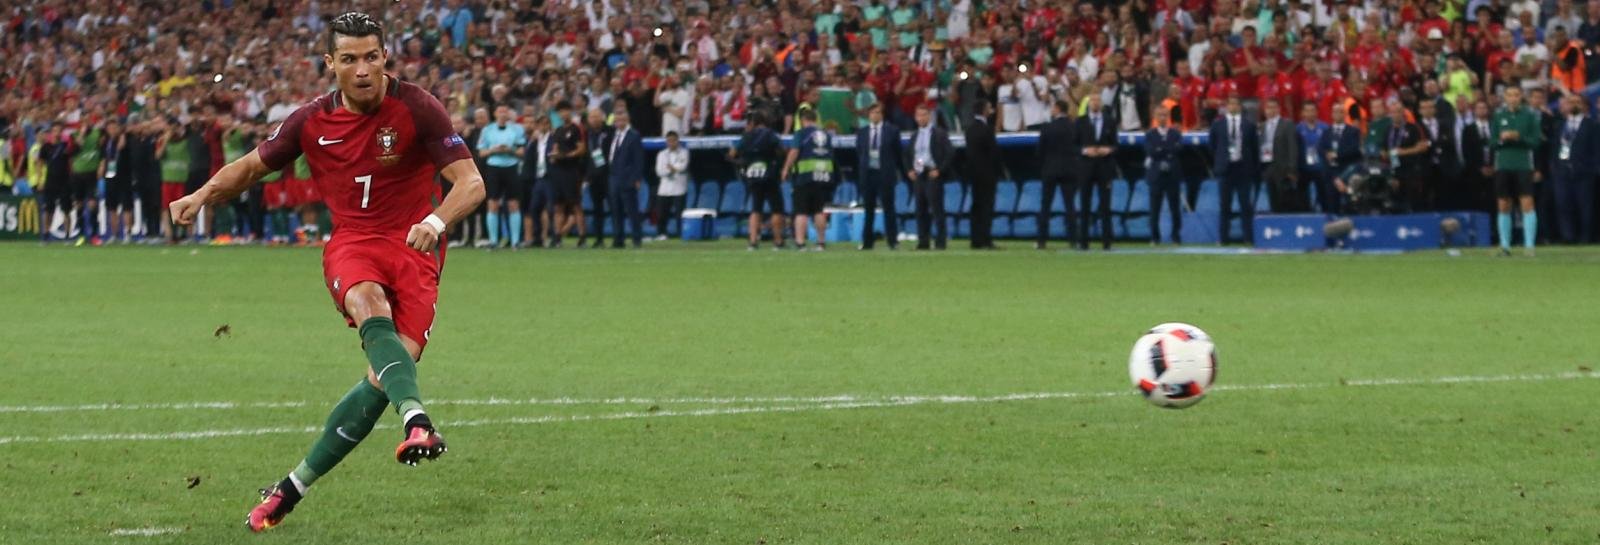 Poland 1-1 Portugal (AET): EURO 2016 Quarter-Final Report (Portugal win 5-3 on penalties)